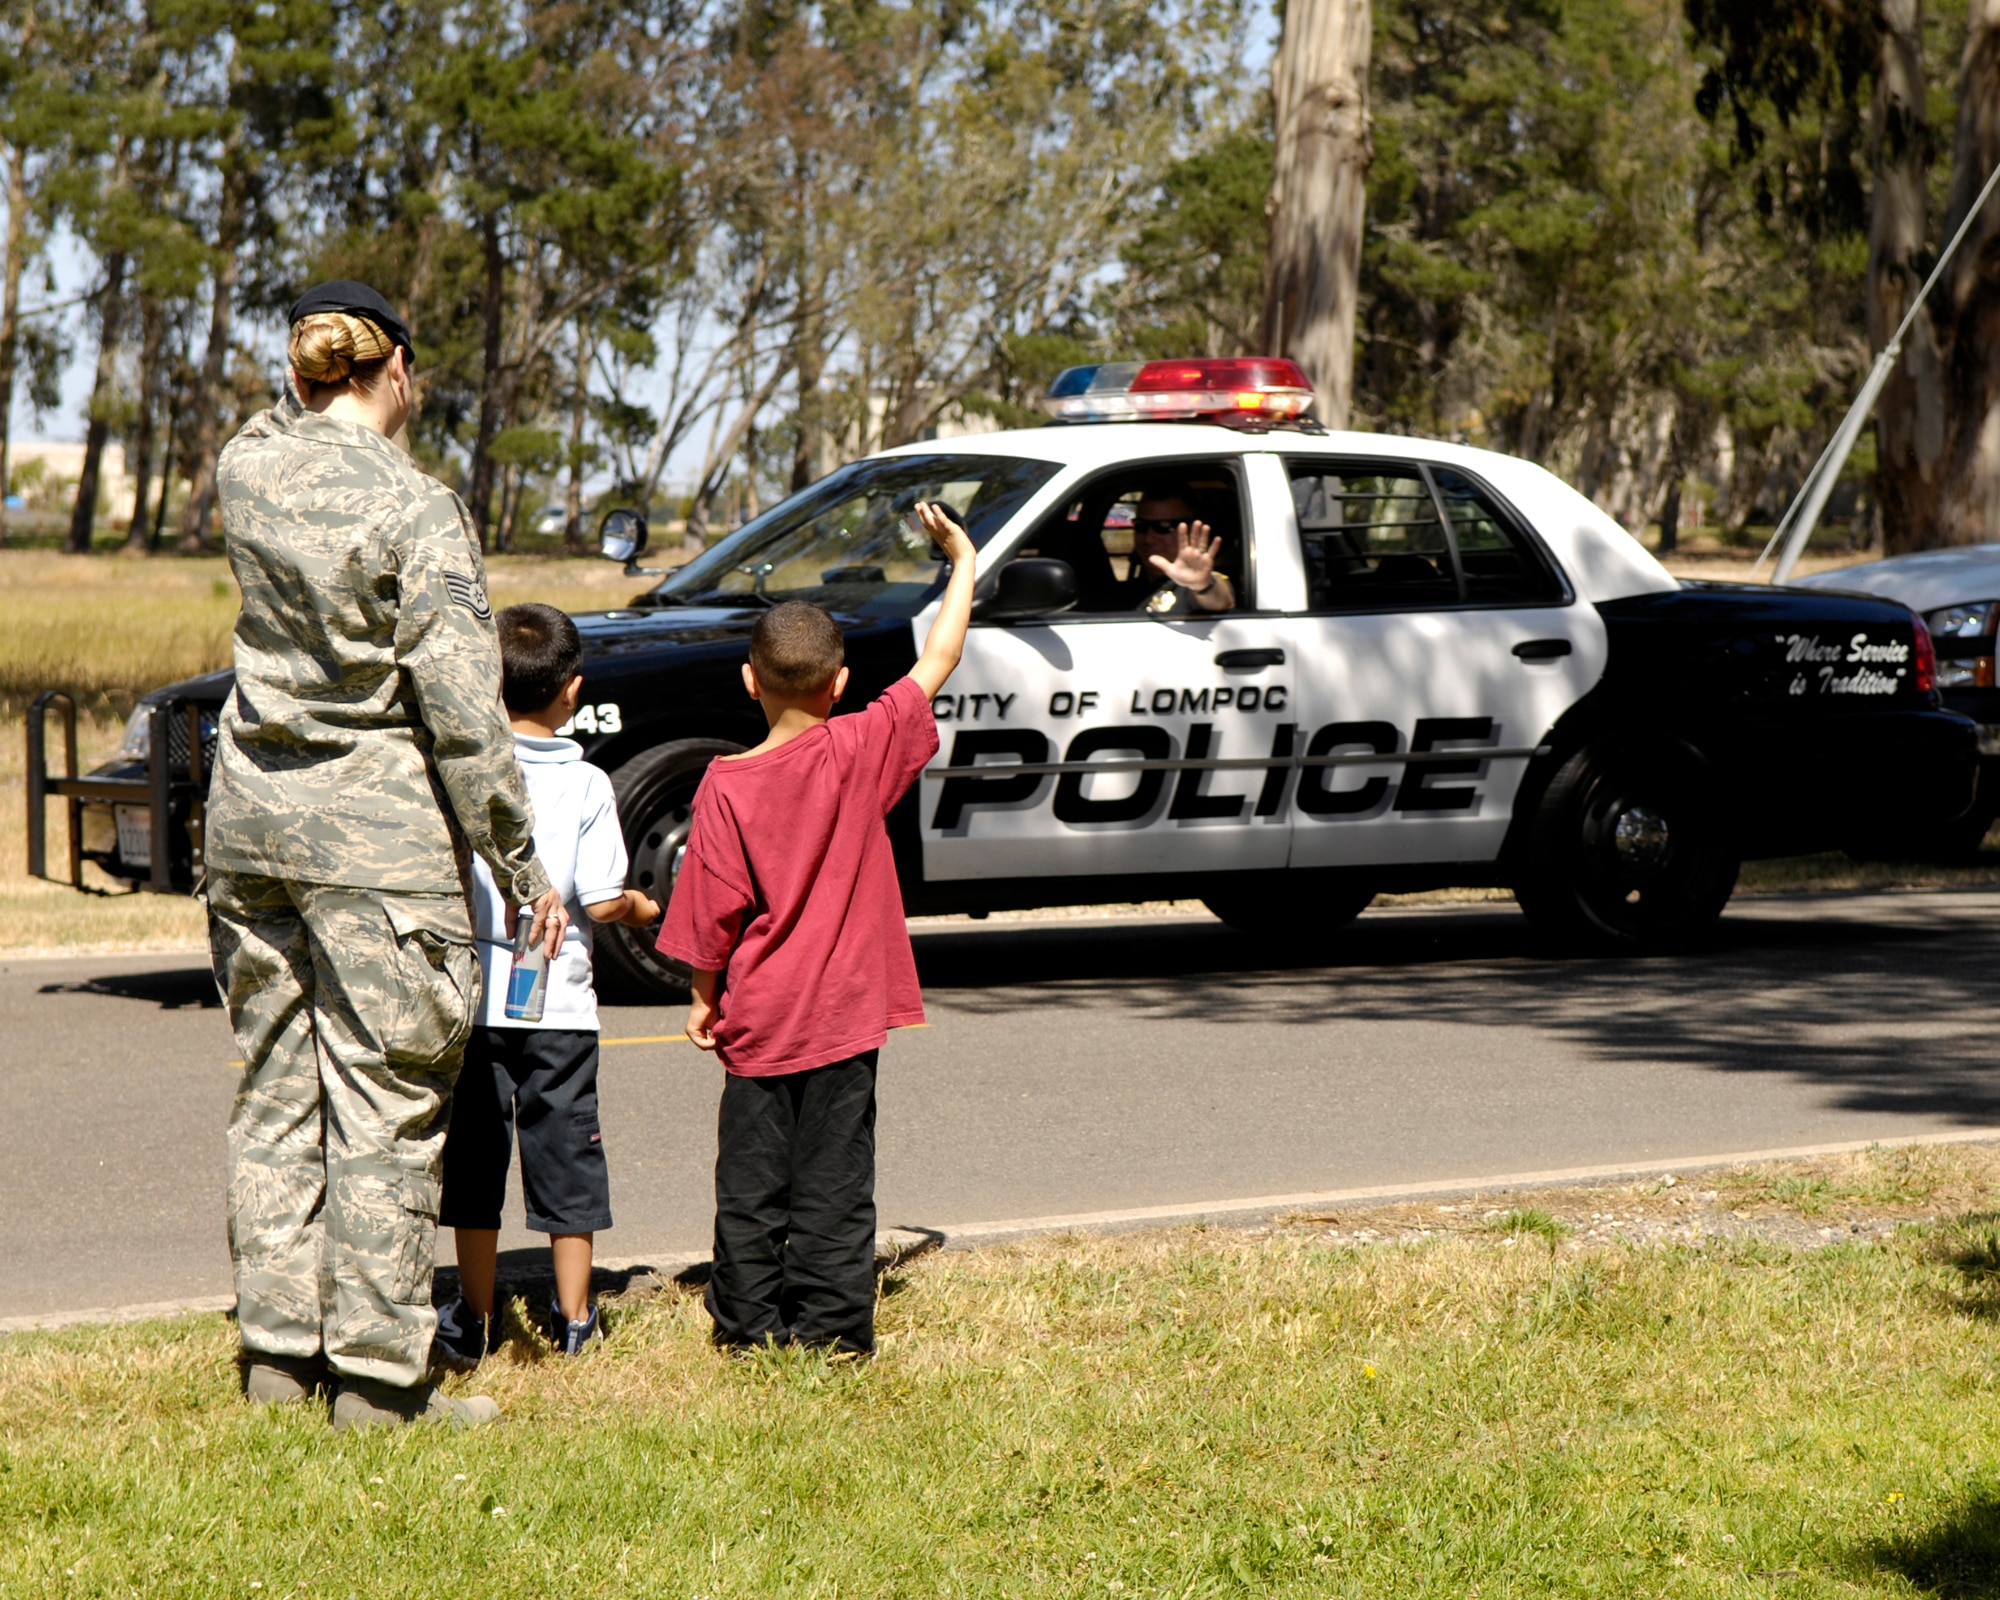 Staff Sgt. Angeline Mason, 30th Security Forces Squadron, her son Devin Mason, and Justin Gilbert wave to a Lompoc Police officer during the Police Week Parade Friday.  The parade ended at Cocheo Park with a BBQ and activities for Vandenberg families.  (U.S. Air Force photo/Airman 1st Class Jonathan Olds)